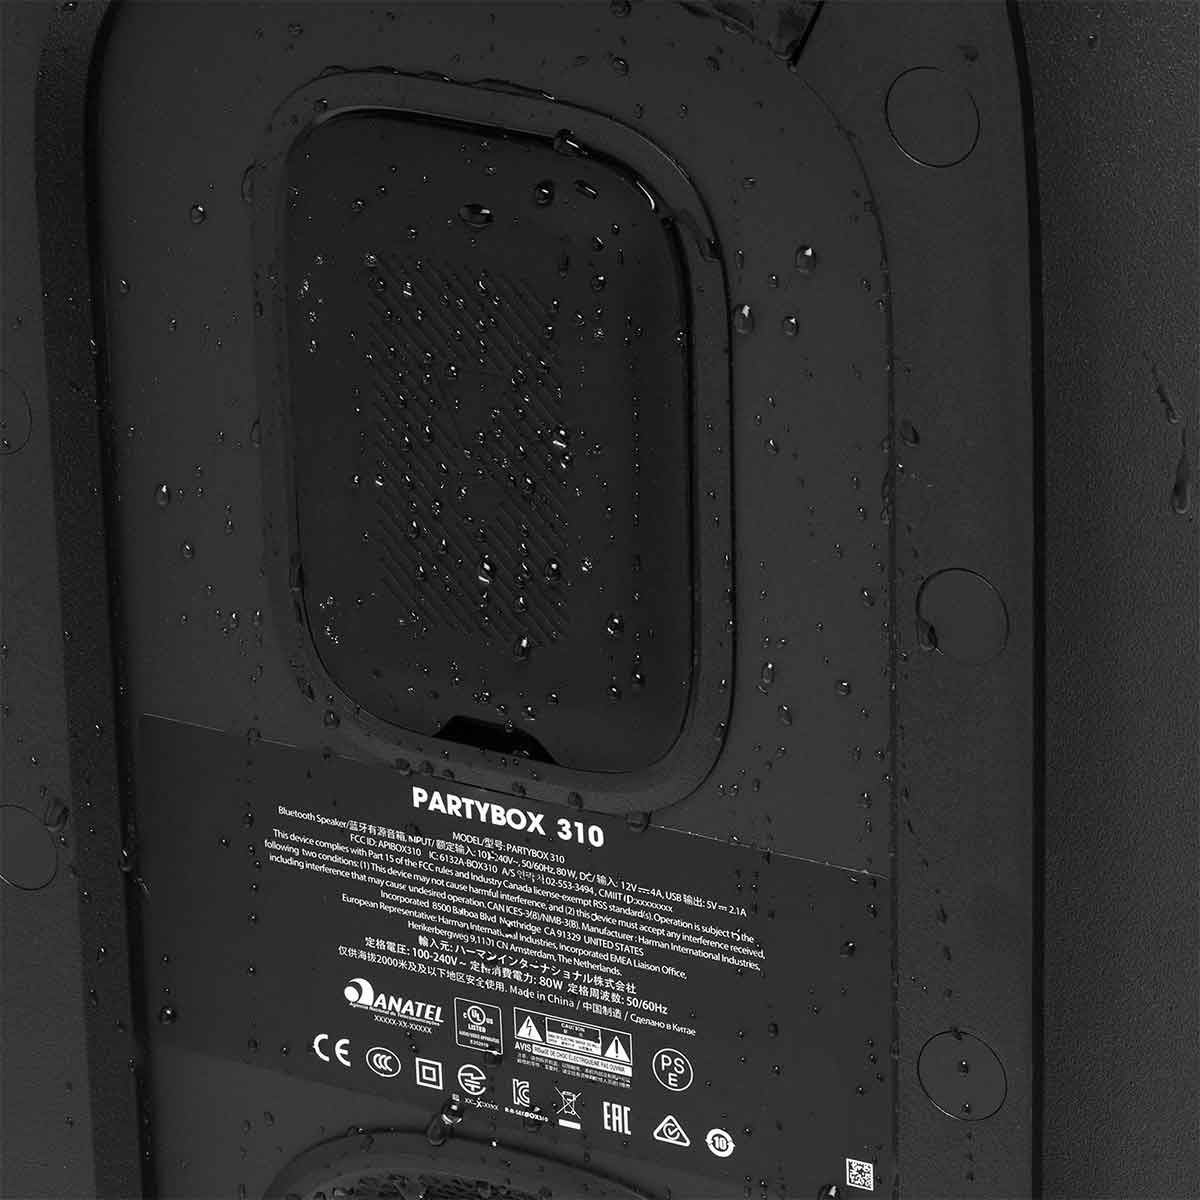 close up of rear panel covered in water droplets